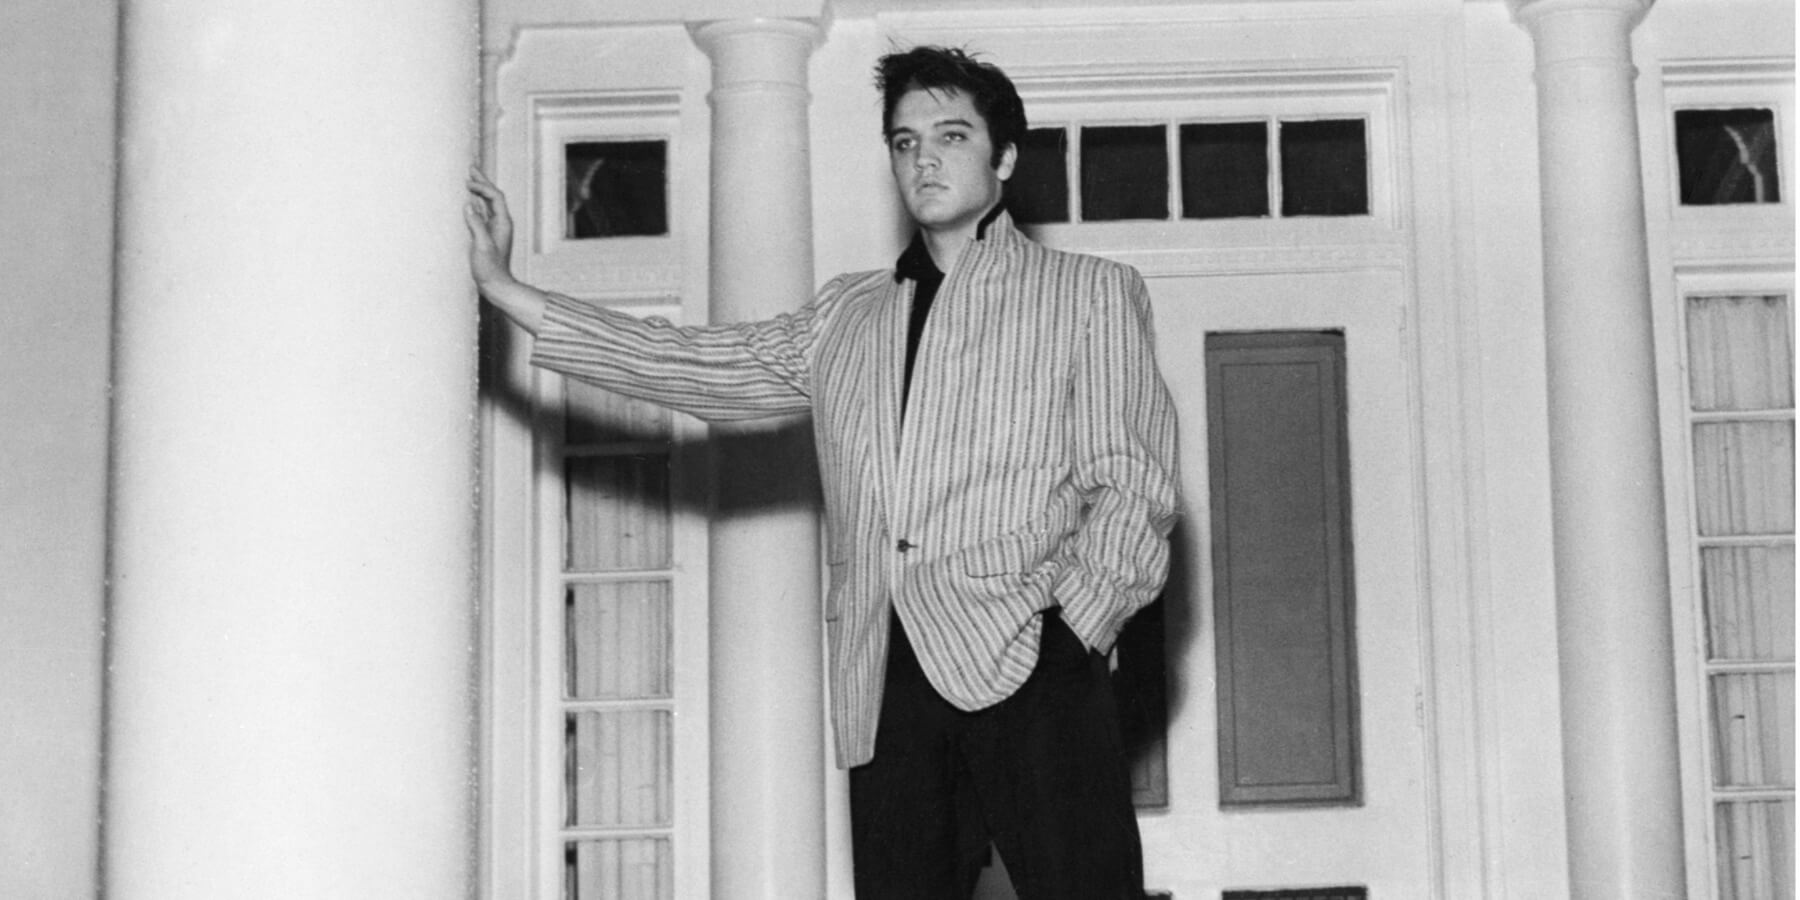 Elvis Presley poses in front of his Graceland home in Memphis, TN.